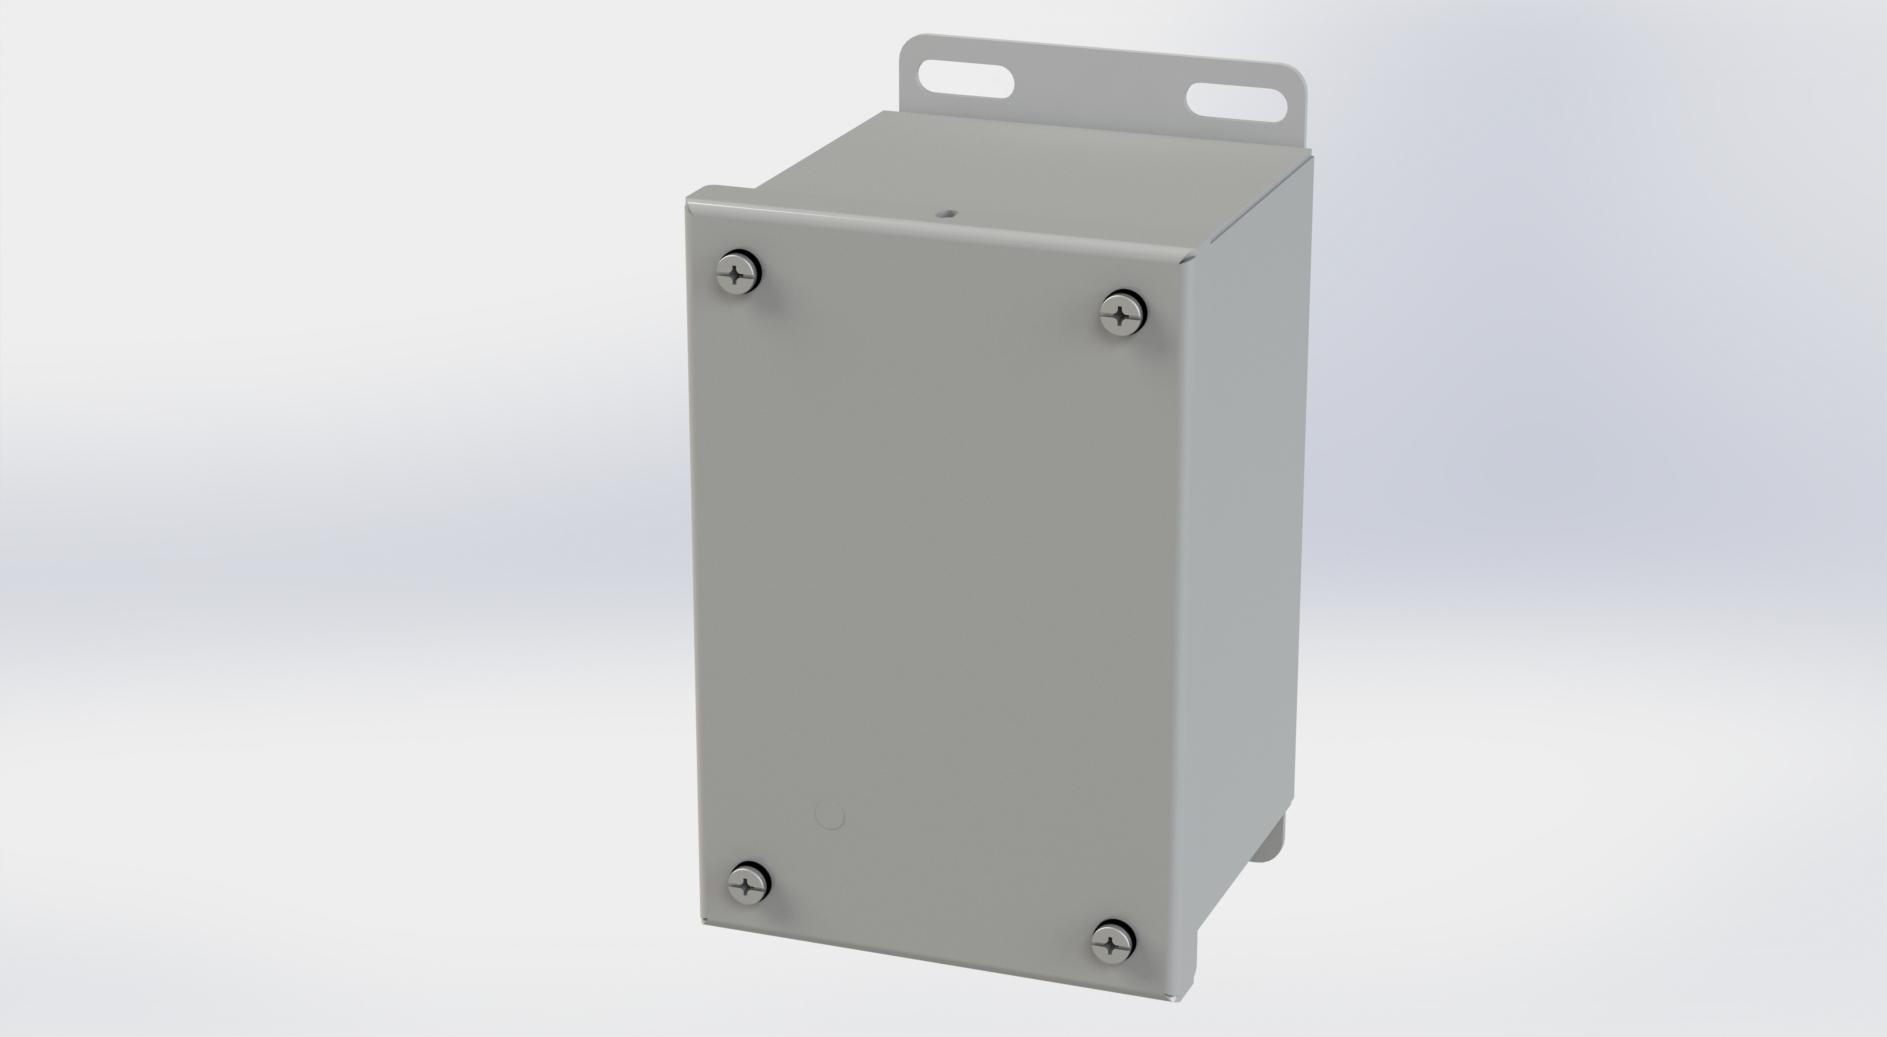 Saginaw Control SCE-6044SC SC Enclosure, Height:6.13", Width:4.00", Depth:4.00", ANSI-61 gray powder coating inside and out.  Optional sub-panels are powder coated white.